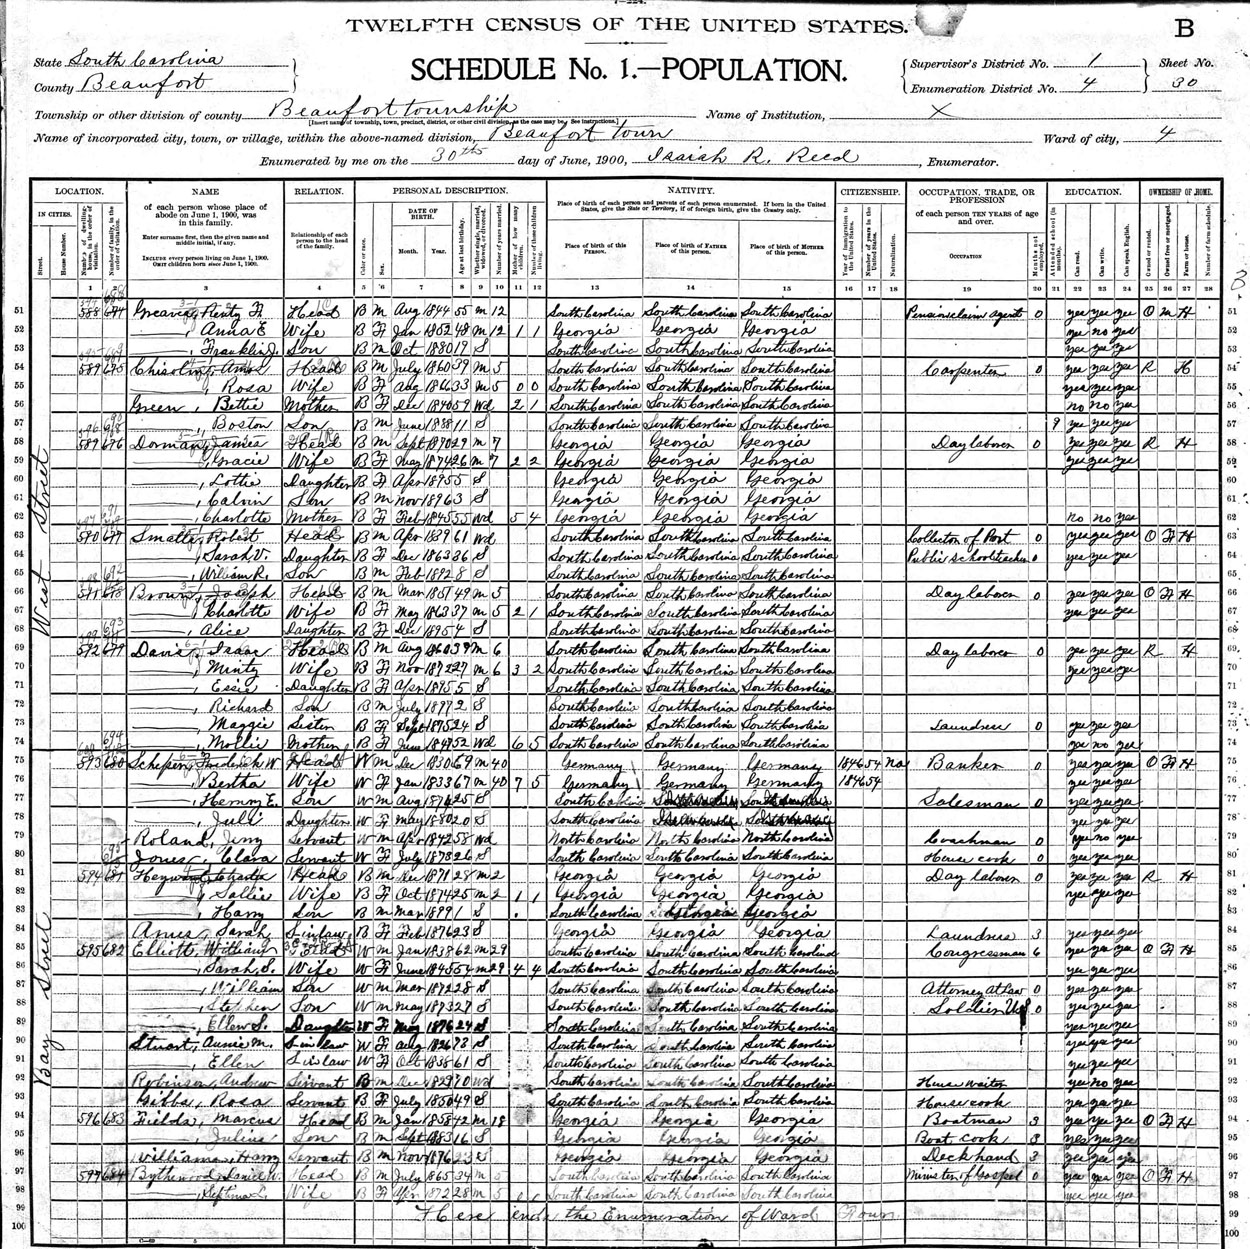 1900 federal population census listing Renty F. Greaves